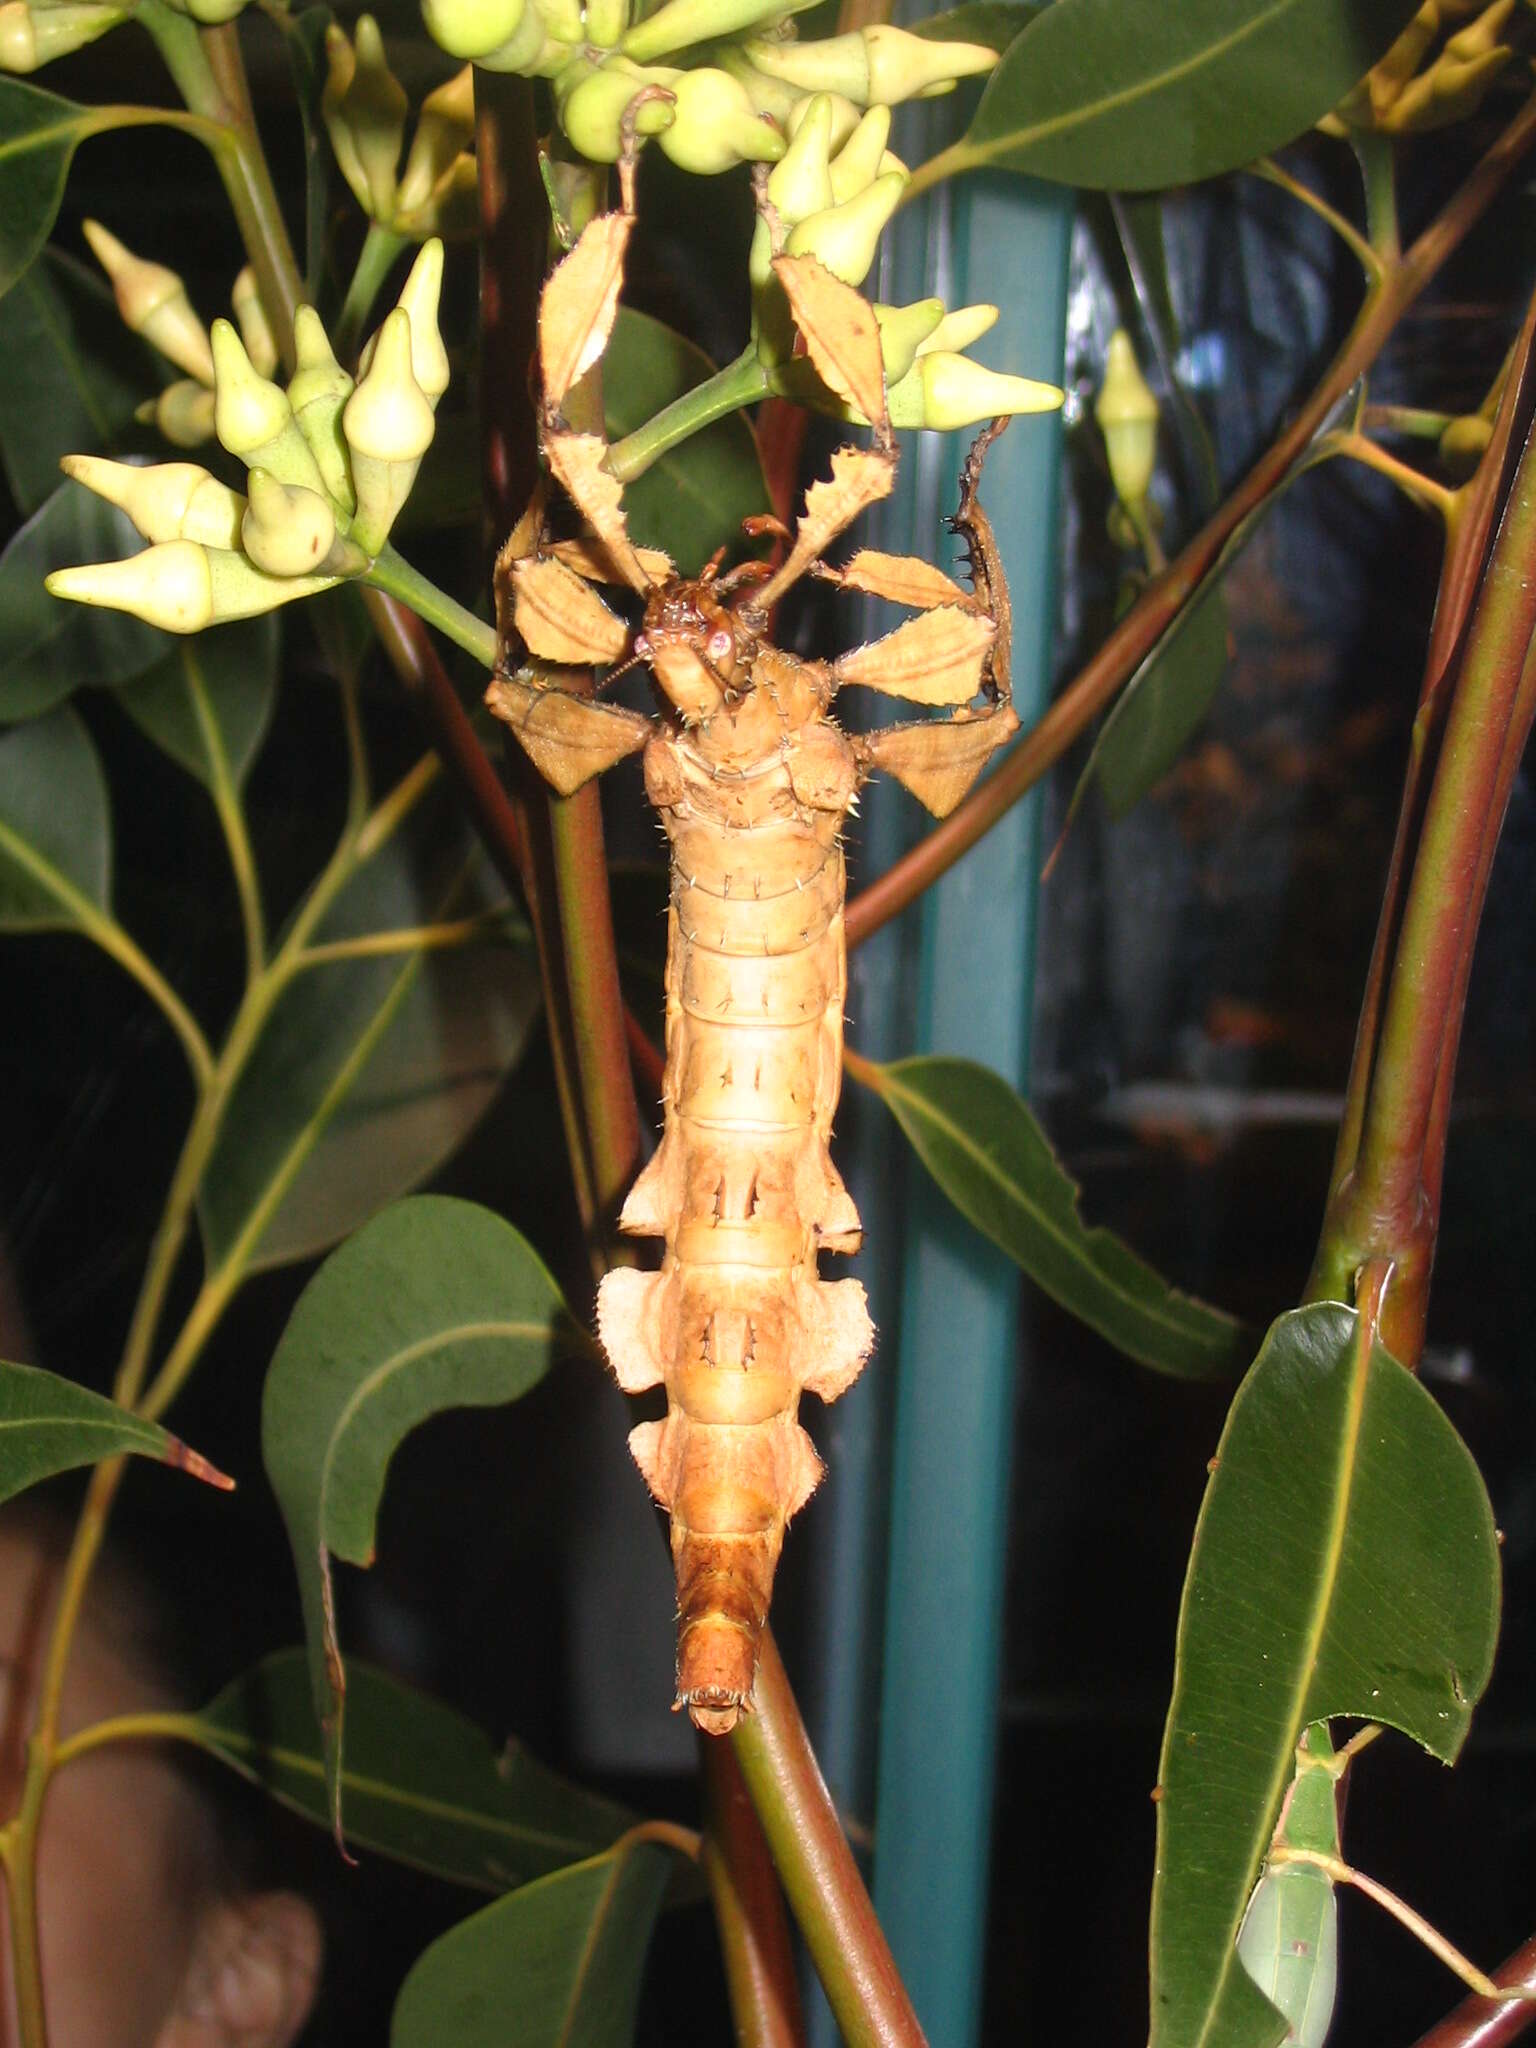 Image of giant stick insect